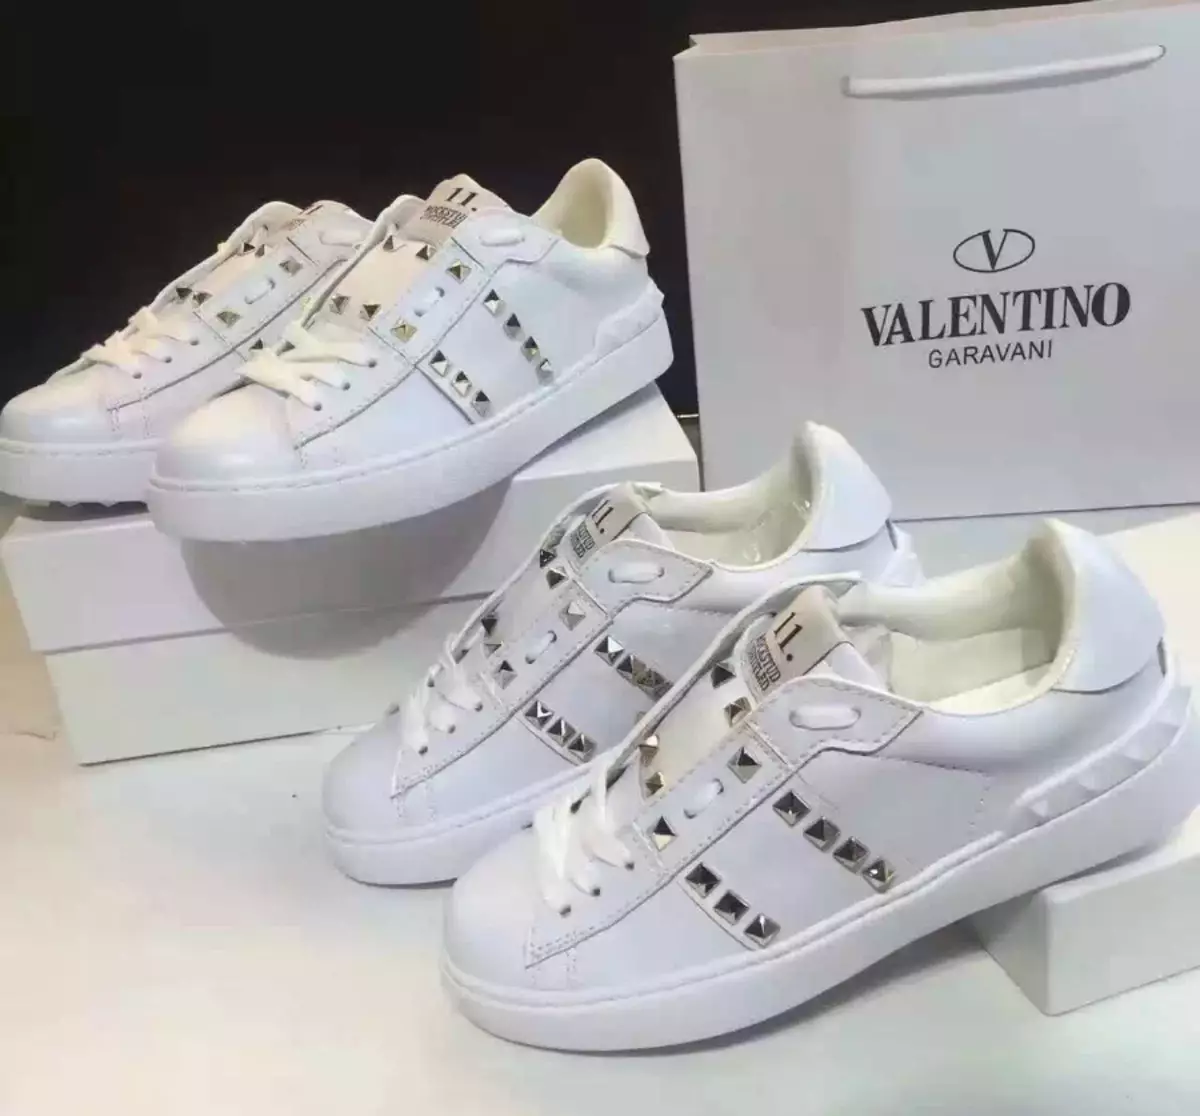 Valentino (147 photos): Collection Red Valentino, bags, sneakers and sneakers, shoes and sandals, women's dresses and perfume, brand reviews 3811_92